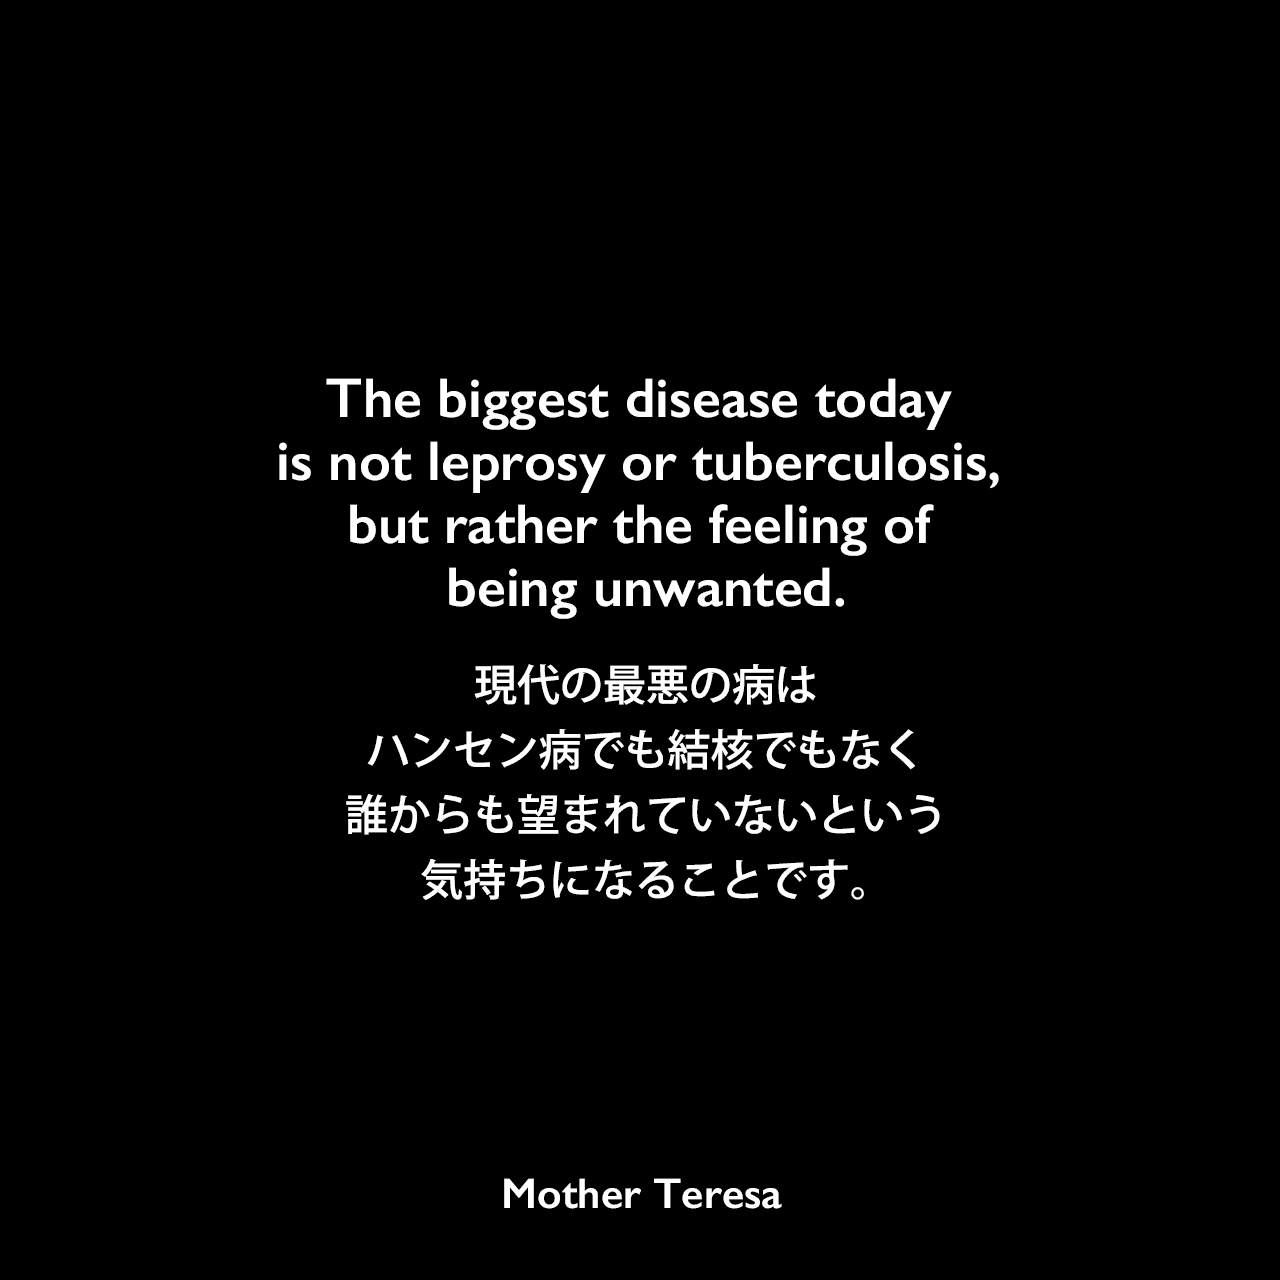 The biggest disease today is not leprosy or tuberculosis, but rather the feeling of being unwanted.現代の最悪の病はハンセン病でも結核でもなく、誰からも望まれていないという気持ちになることです。- マルコム・マゲリッジの本「Something Beautiful for God」よりMother Teresa